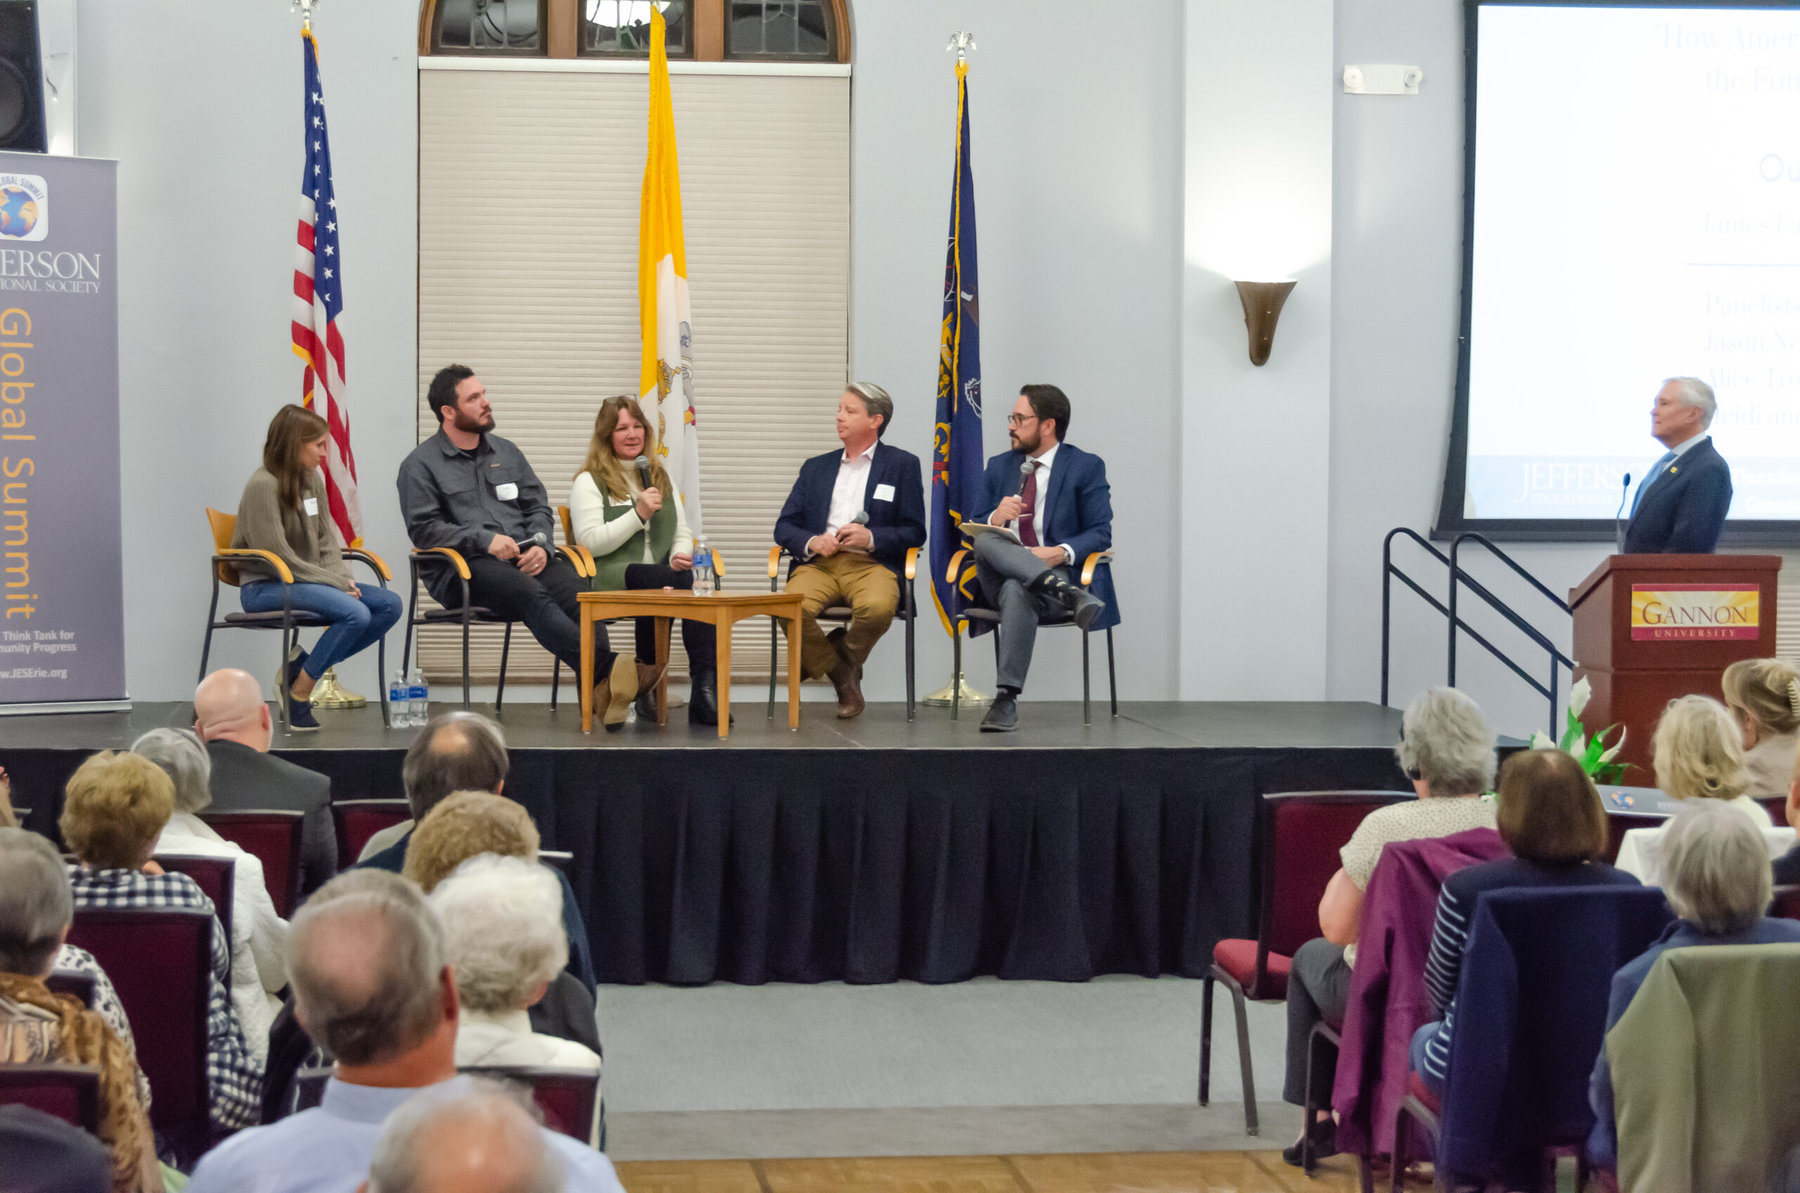 “How America’s Towns are Writing the Future of the Country,” Jefferson Educational Society Global Summit 2022 event featuring (from left) Heidi and Isaac Tucker, Alice Trowbridge, Jason Neises, Ben Speggen, and James Fallows. Photo by Pierre Bellicini, courtesy of JES.